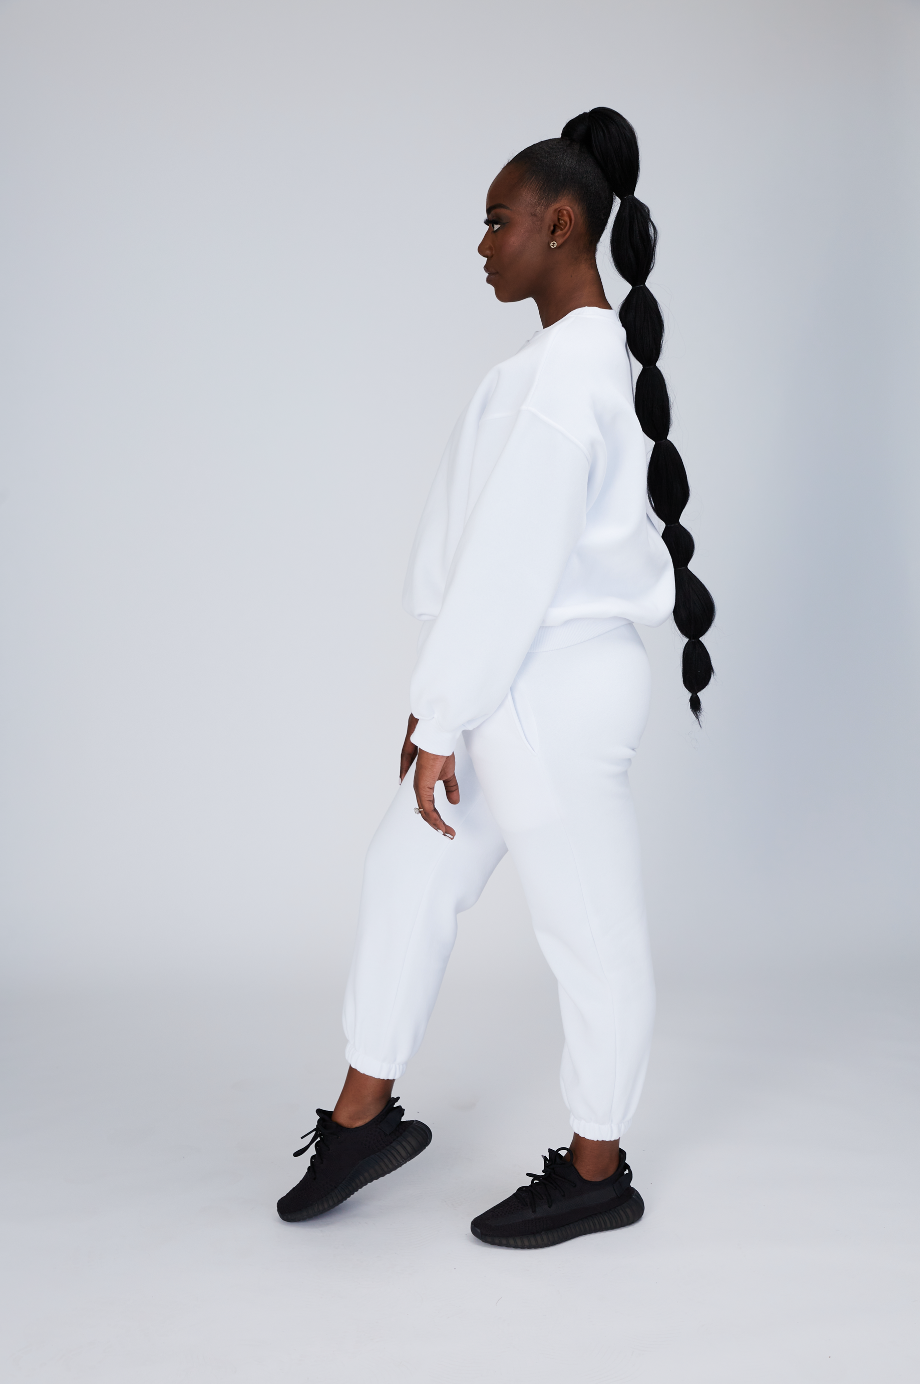 women’s white jumper and white tracksuit pants - kate galliano activewear